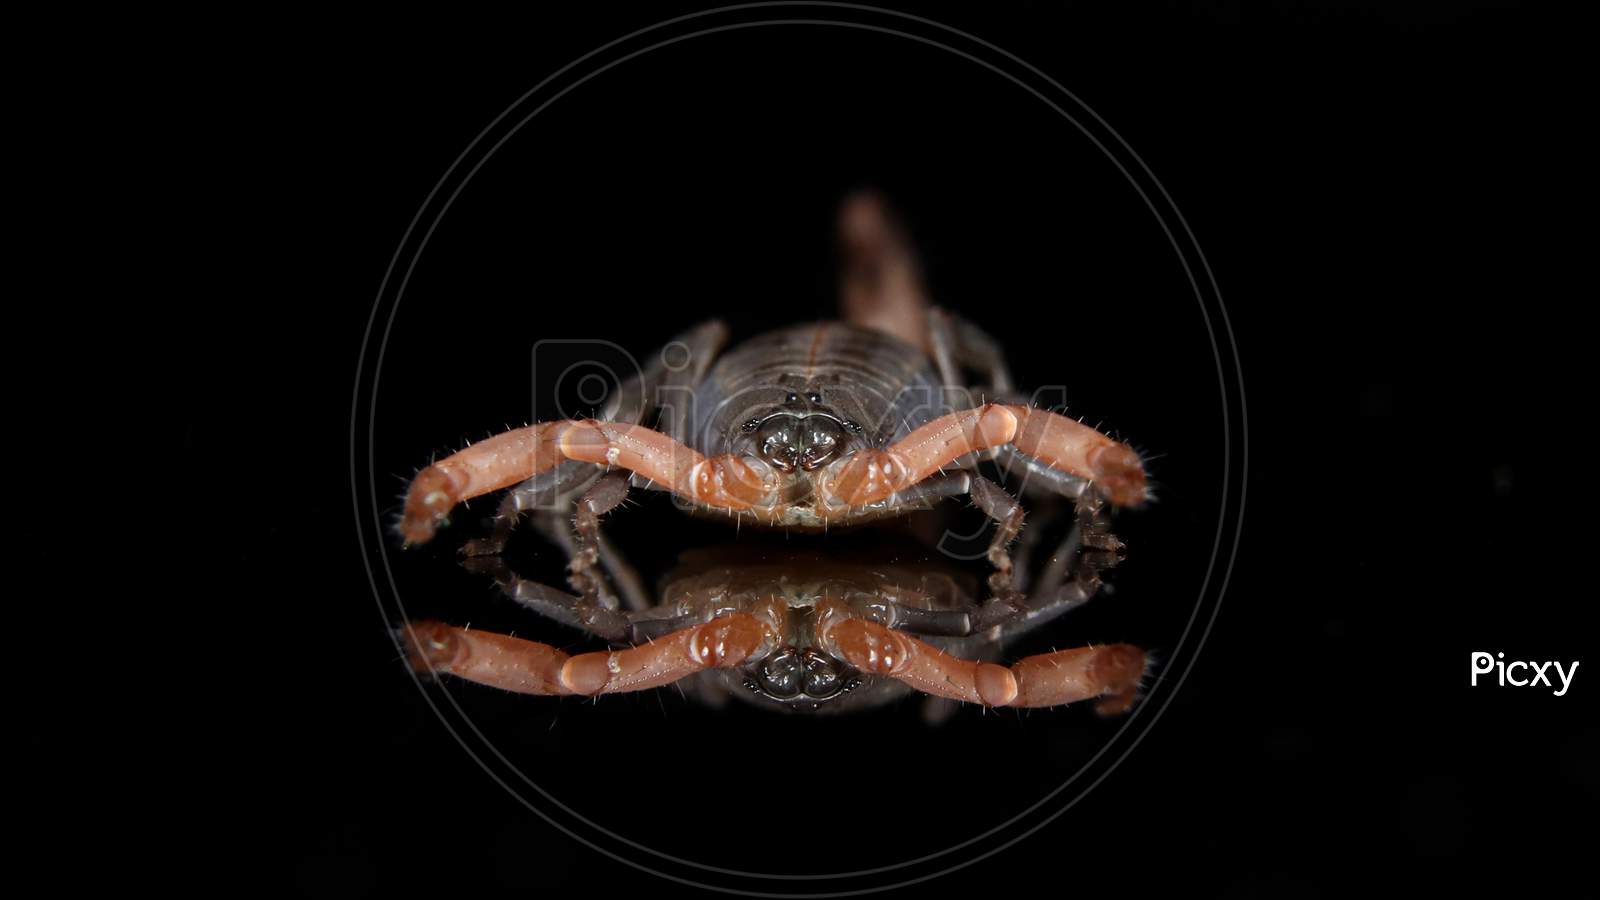 scorpion (Lychas tricarinatus) front view